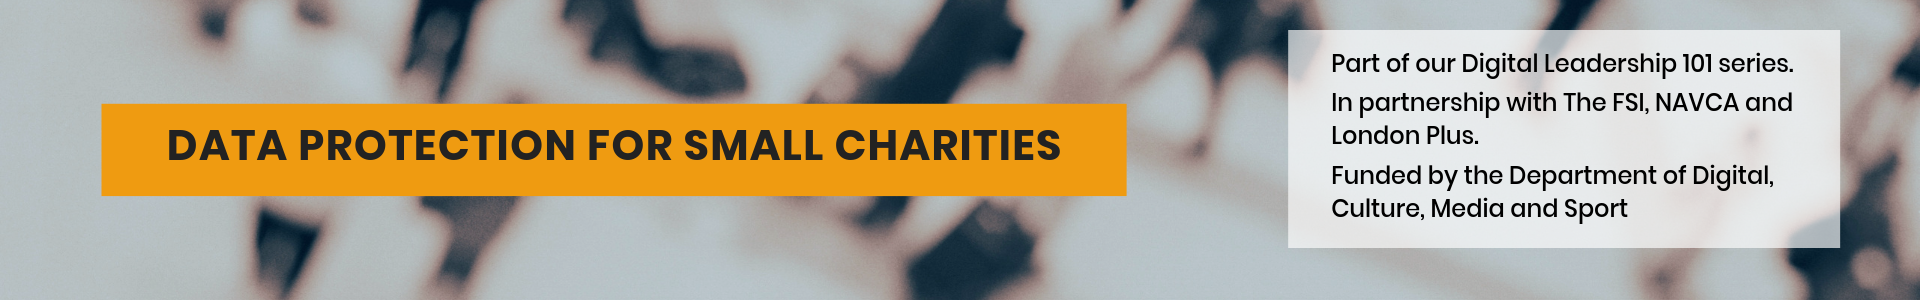 Data Protection for small charities blog header, text on image of crowd of people